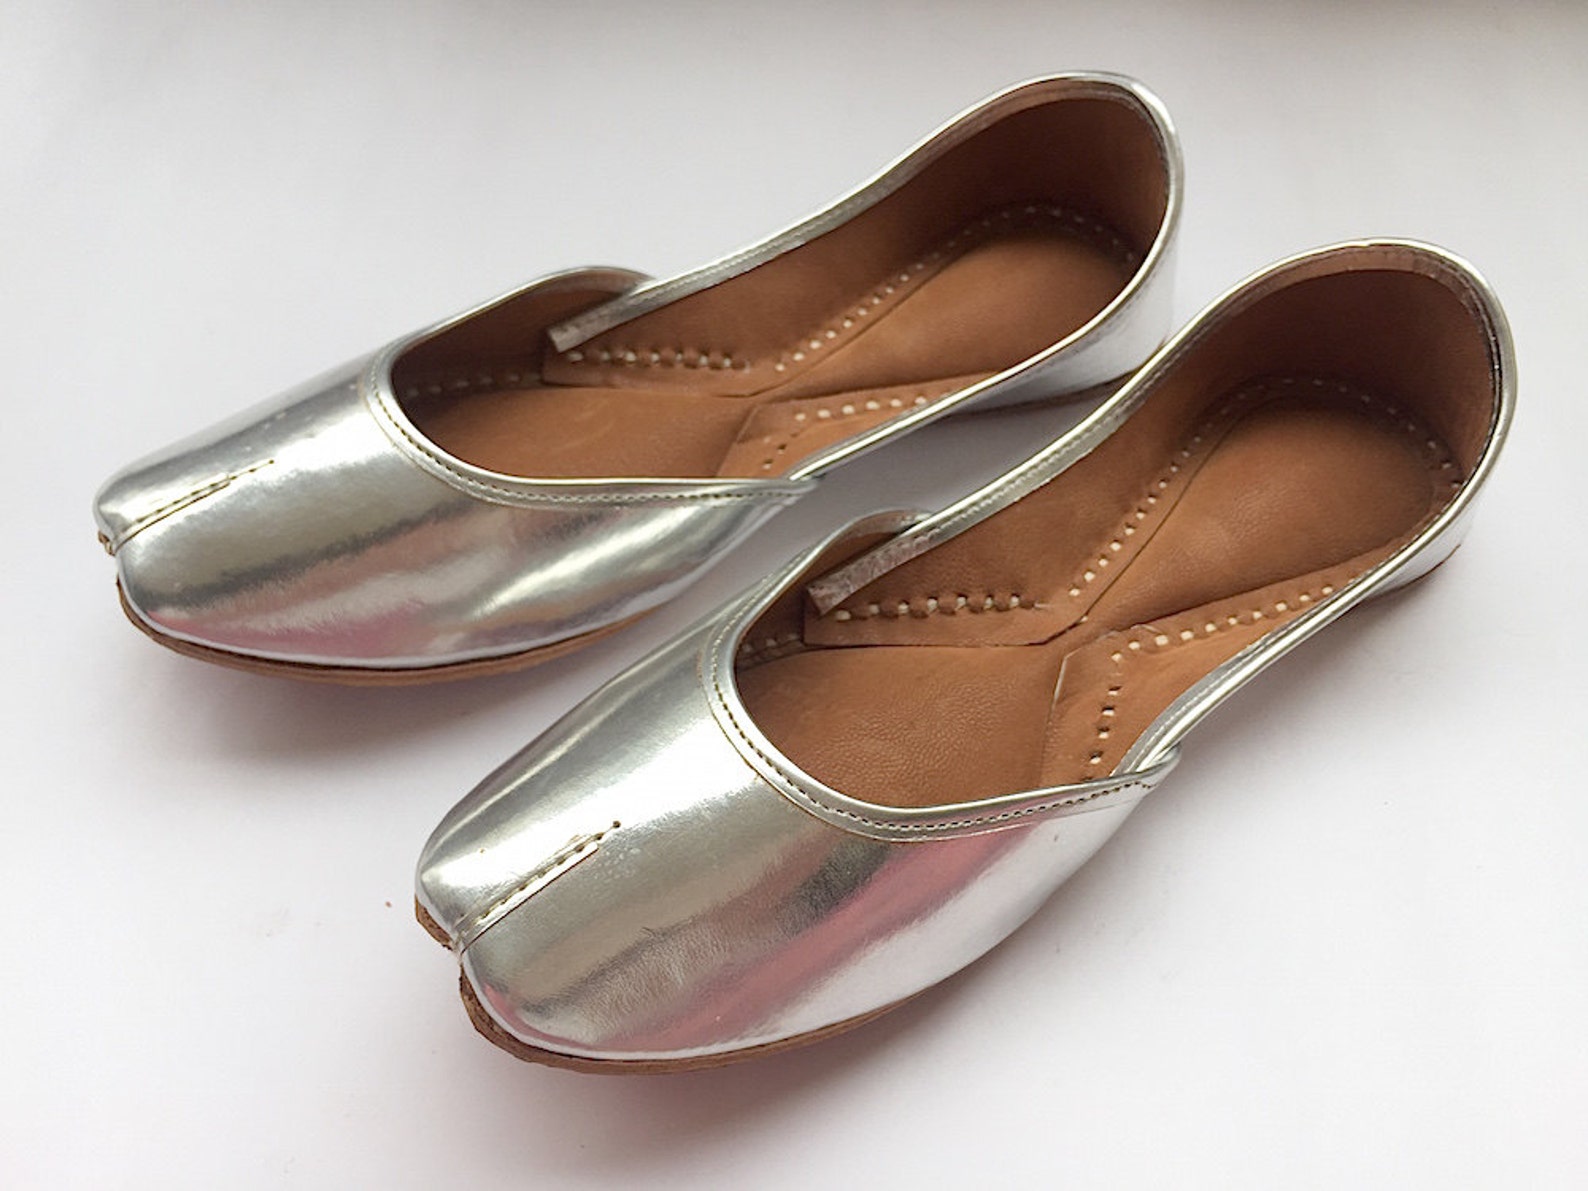 us 10 - chaandi ki parat - metallic silver leather ballet shoes for women, everyday wear - indian shoes from enhara/gift for her